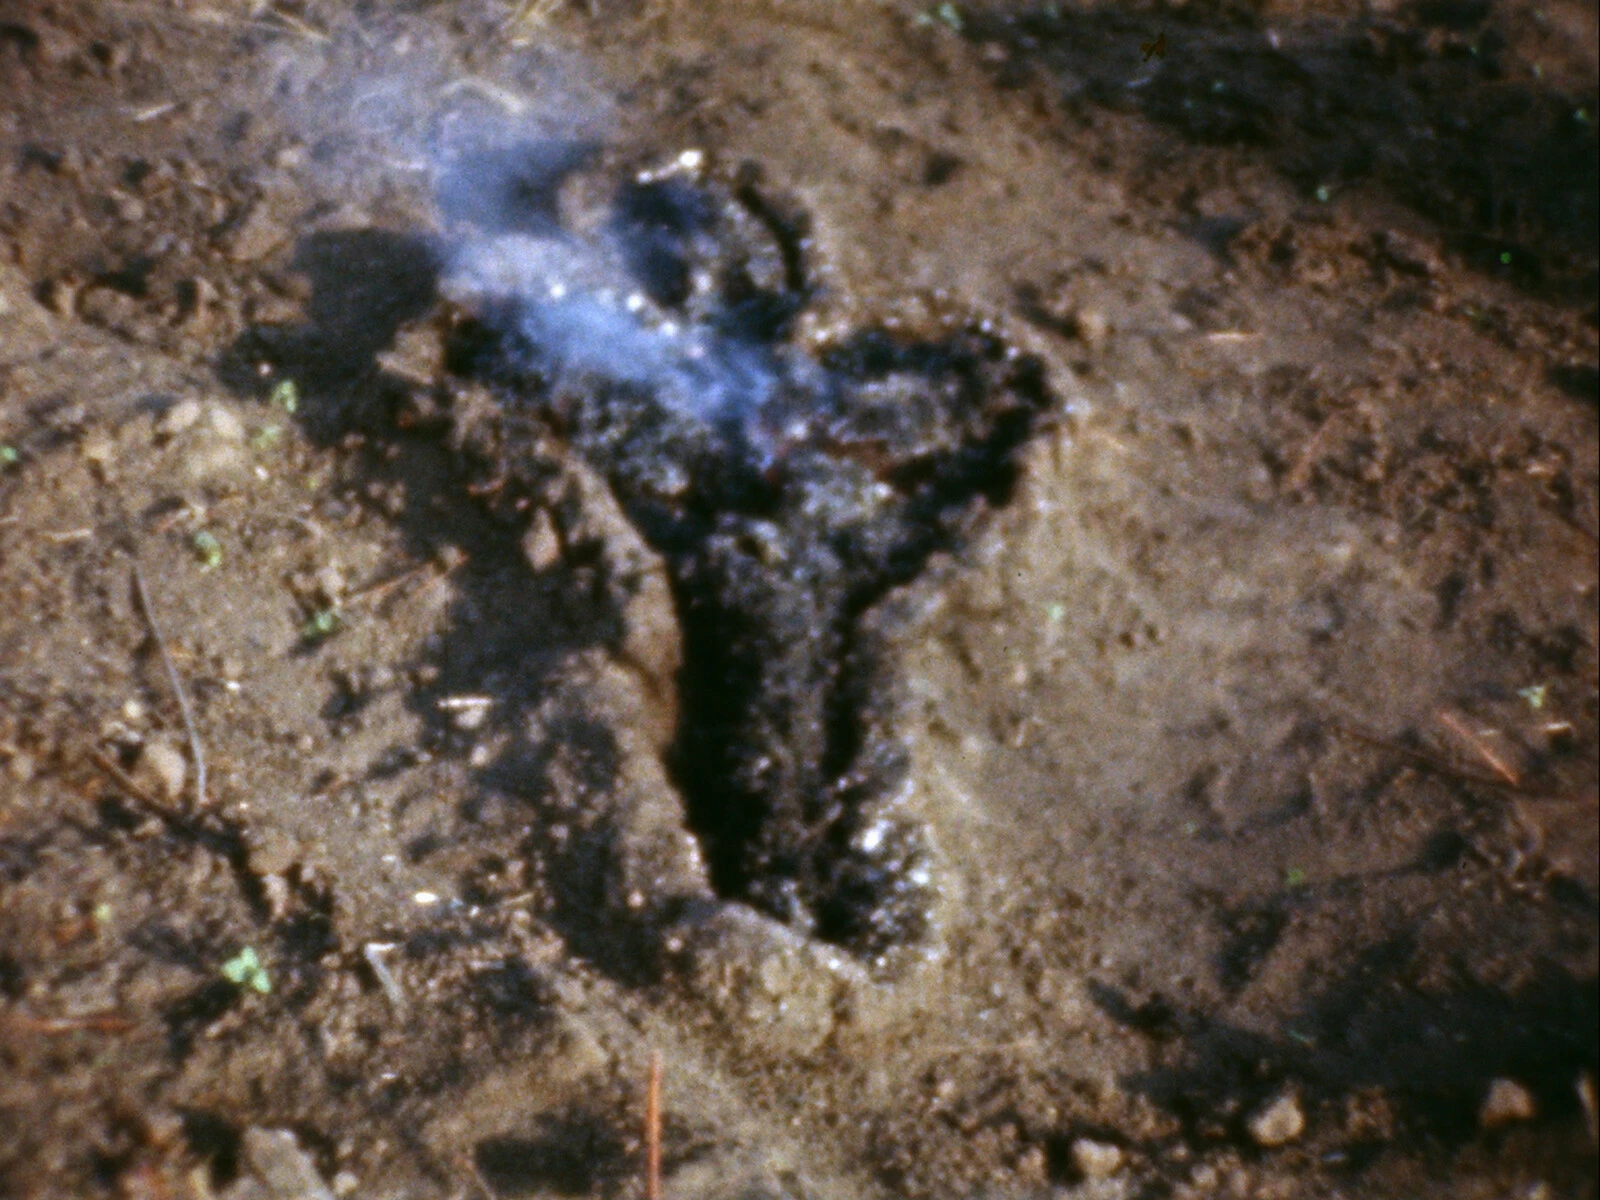 Smoke rises from a pile formed in the outline of a human amid a landscape of dirt.